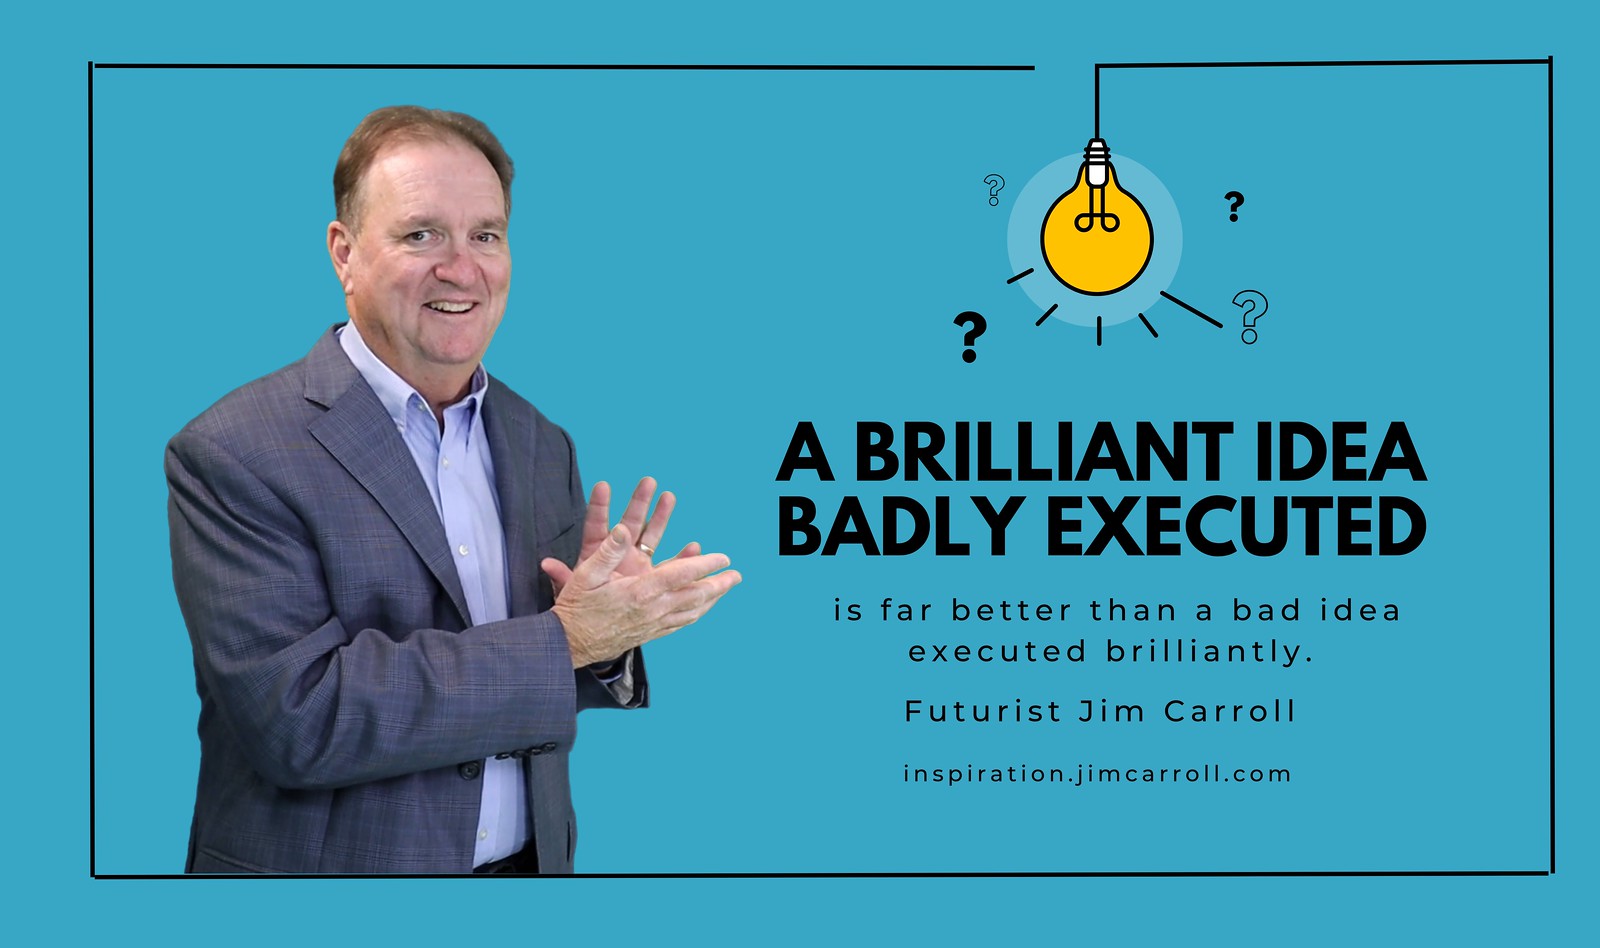 "A brilliant idea badly executed often results in a better idea executed brilliantly!" - Futurist Jim Carroll